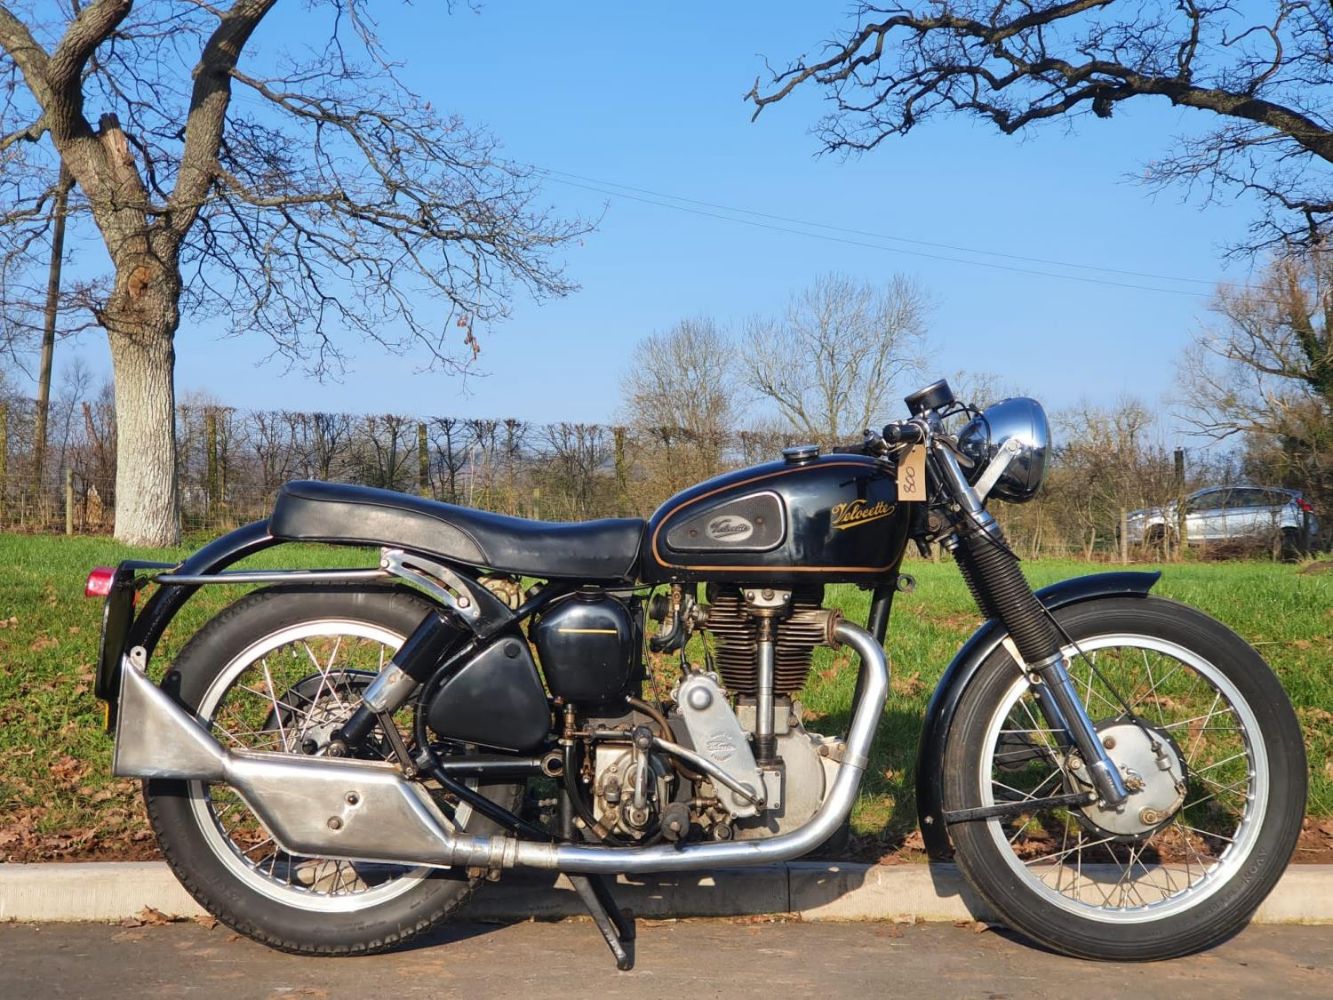 VINTAGE AND CLASSIC MOTORCYCLES